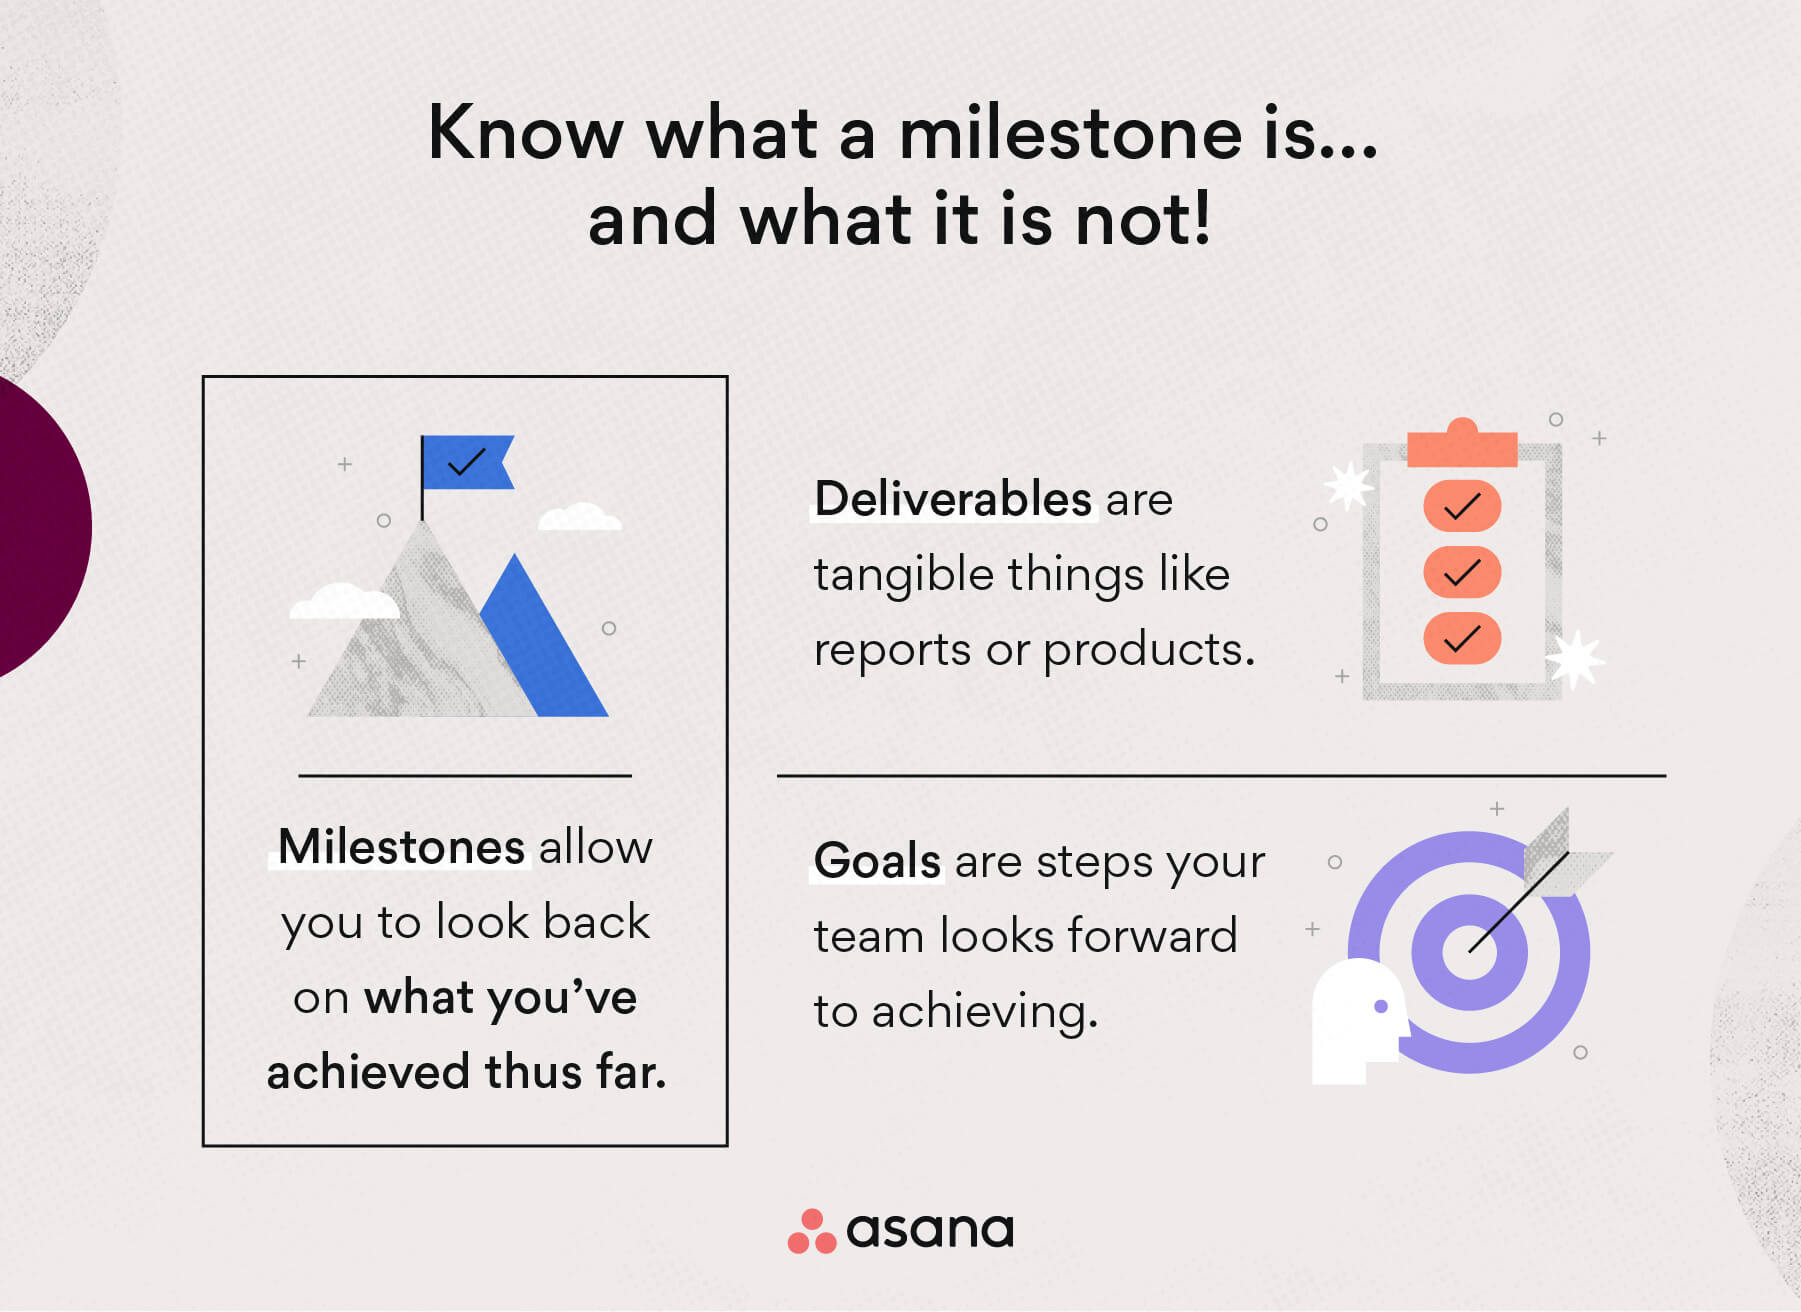 [inline illustration] know what a milestone is and what it is not (infographic)